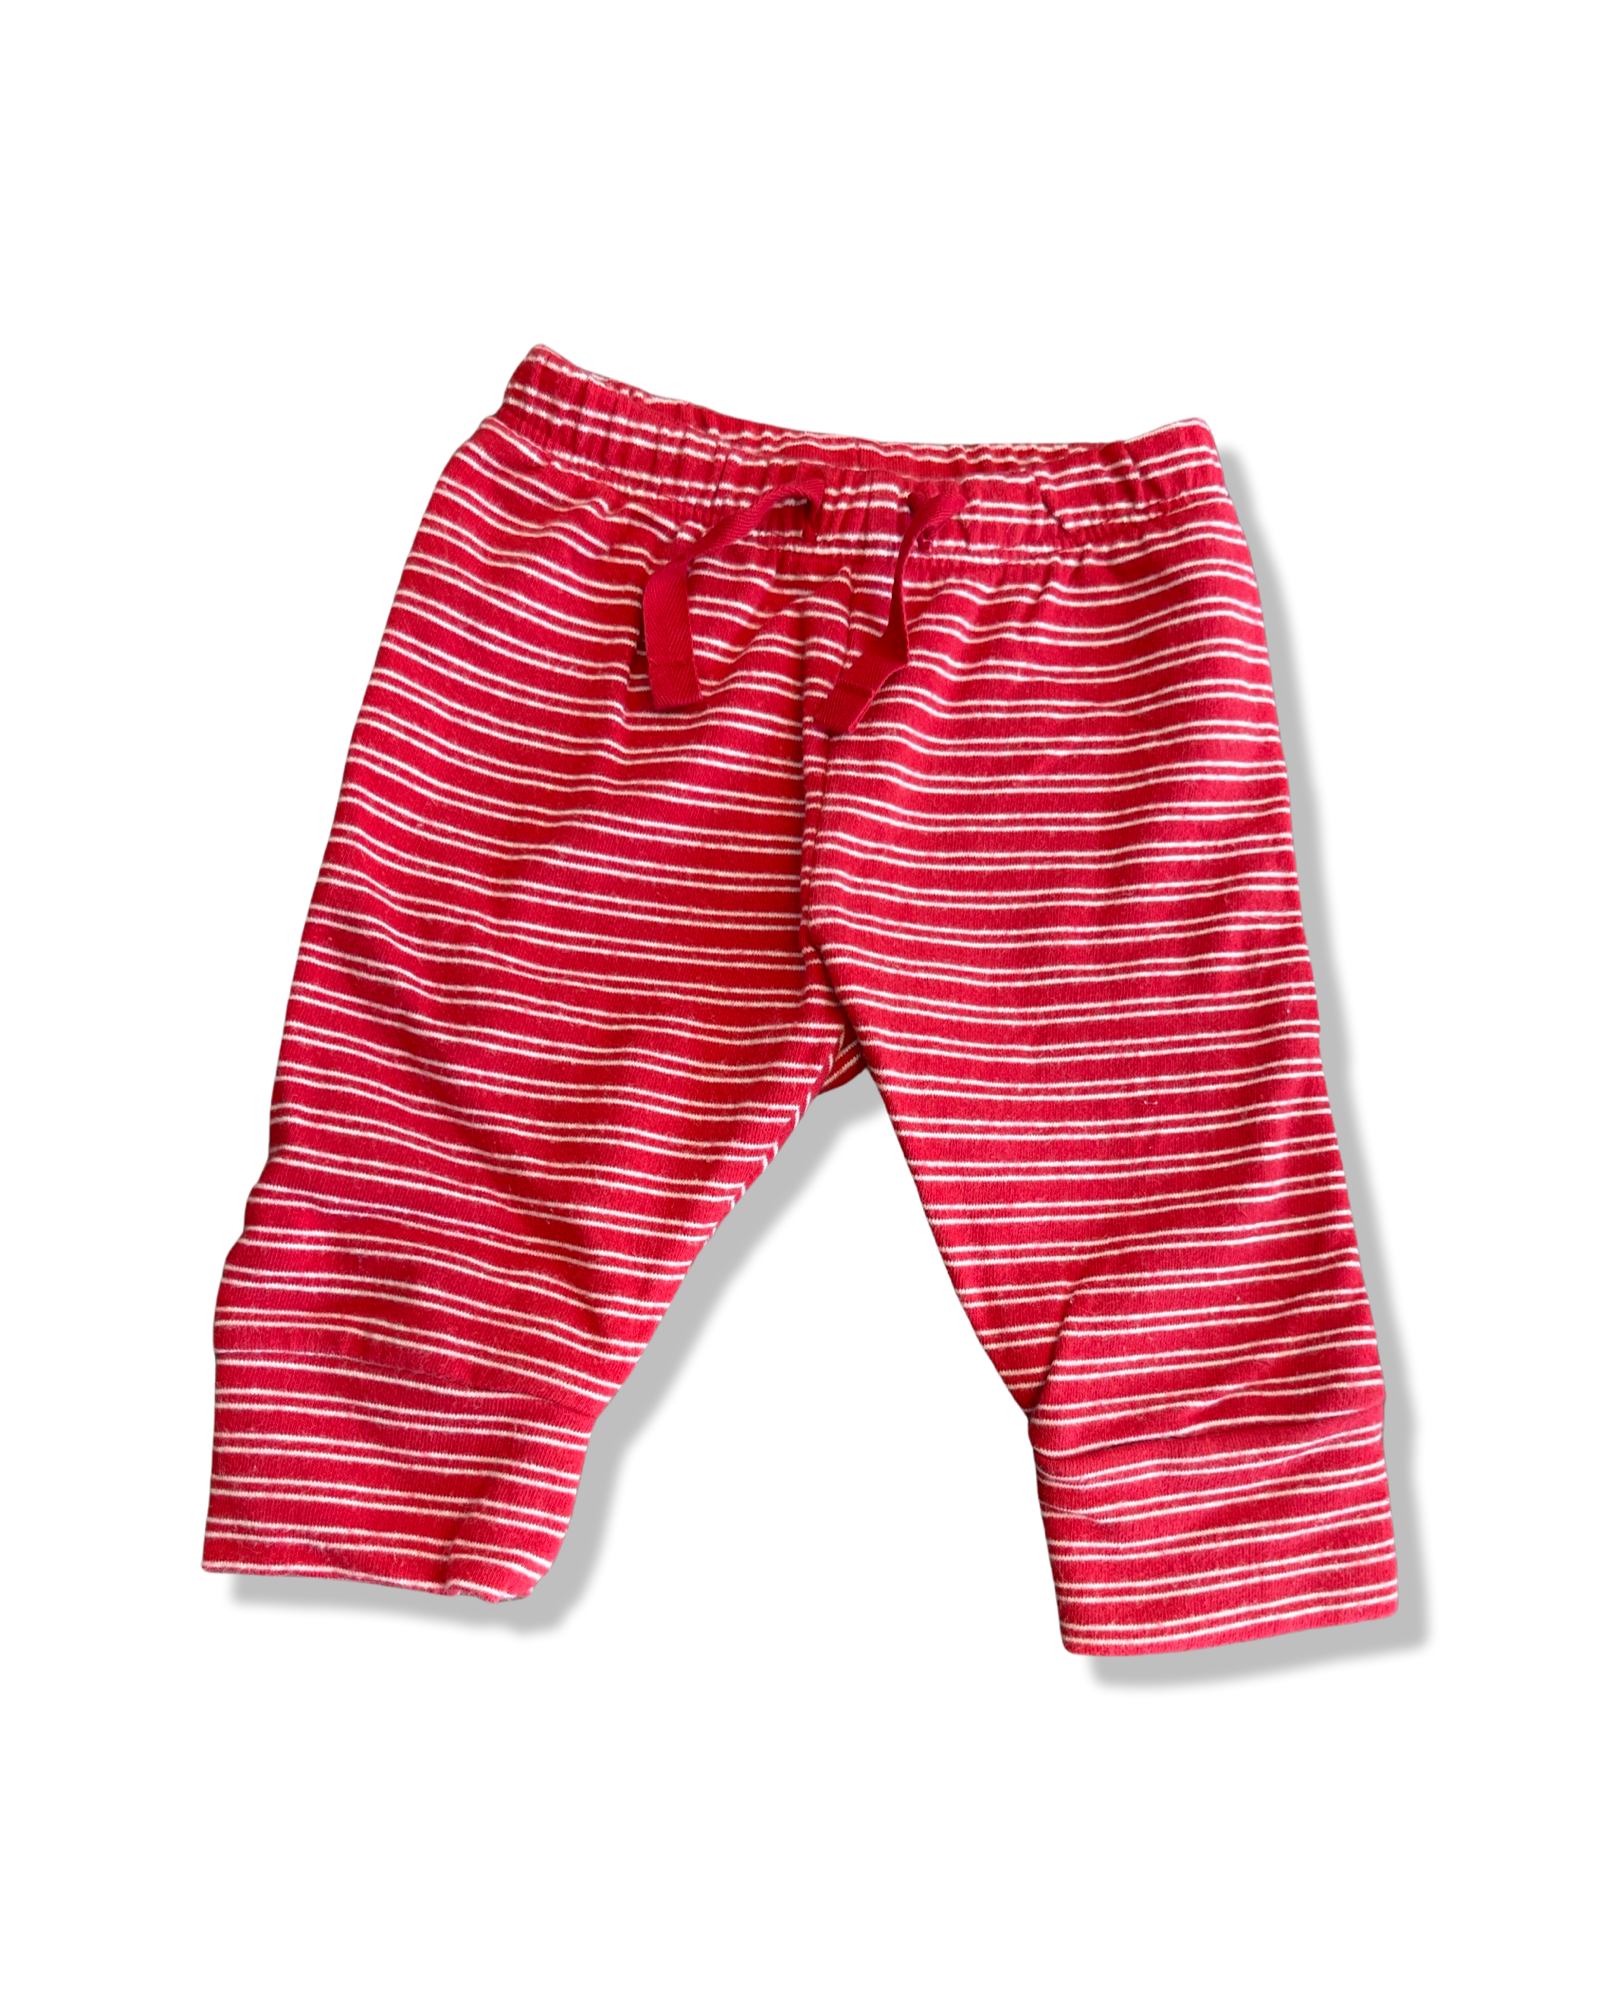 Baby Gap Red and White Stripe Pants (0-3M)